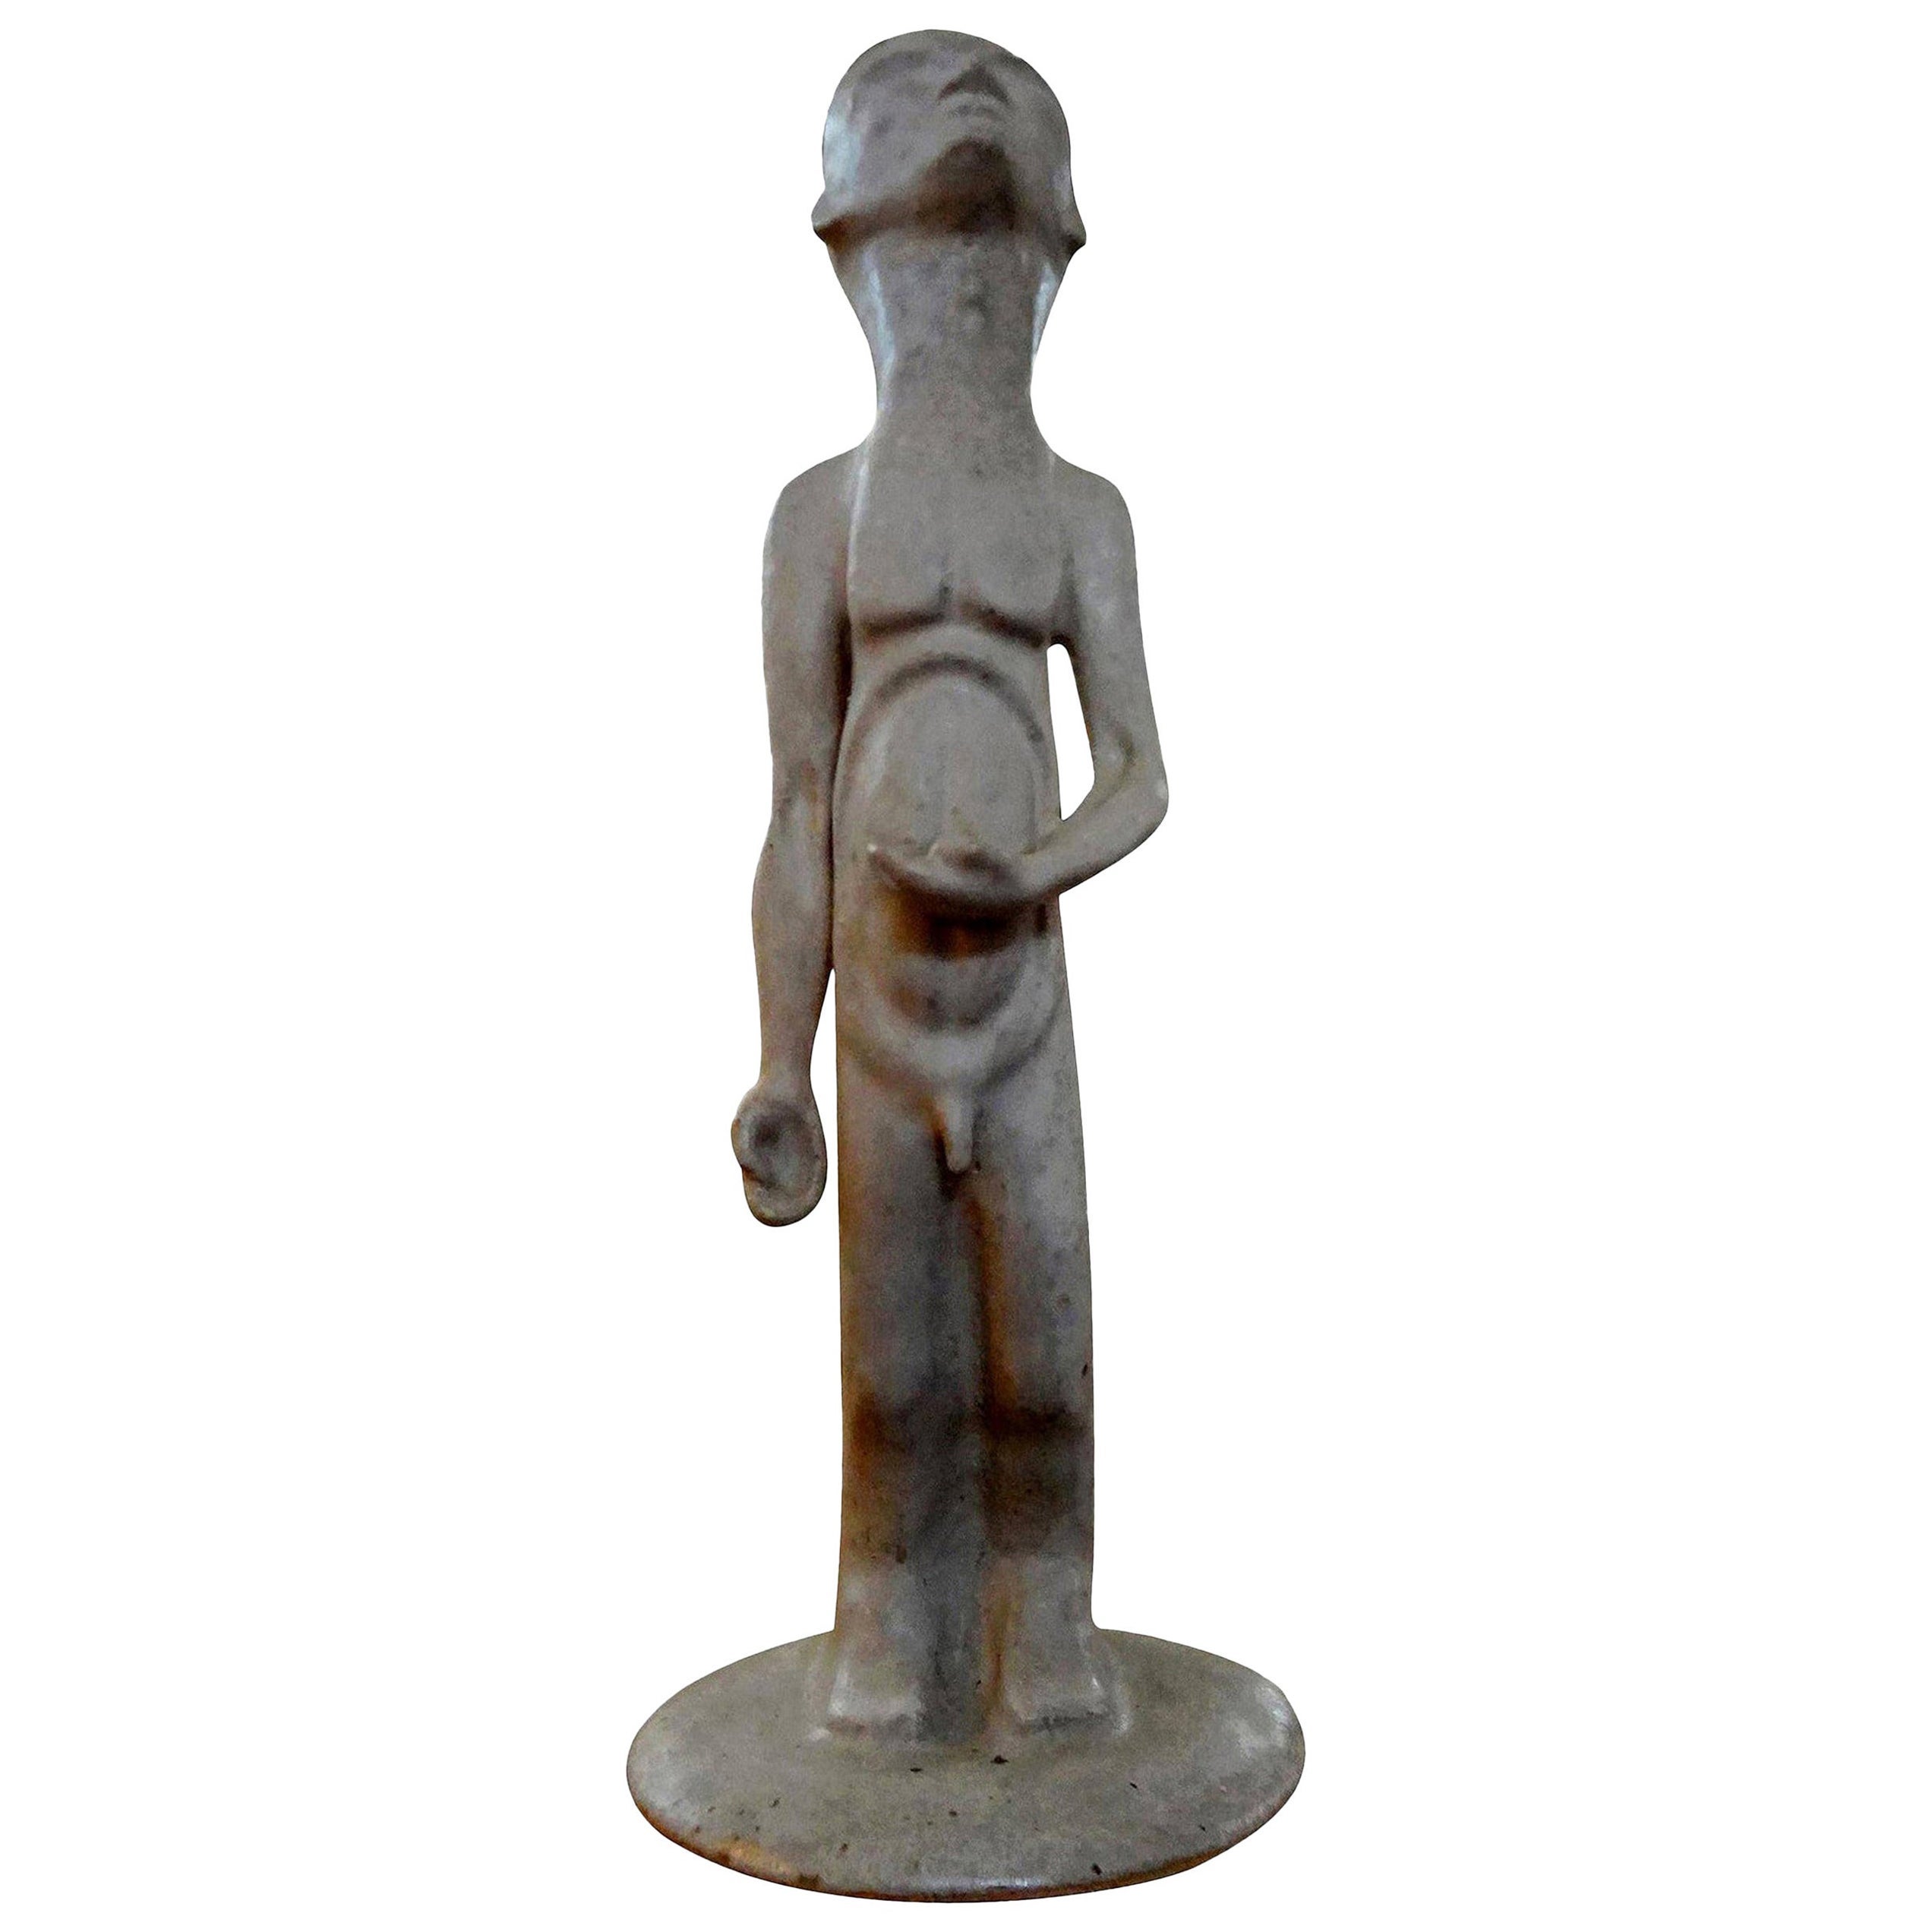 Mid-Century Modern Sculpture in the Manner of Amedeo Modigliani